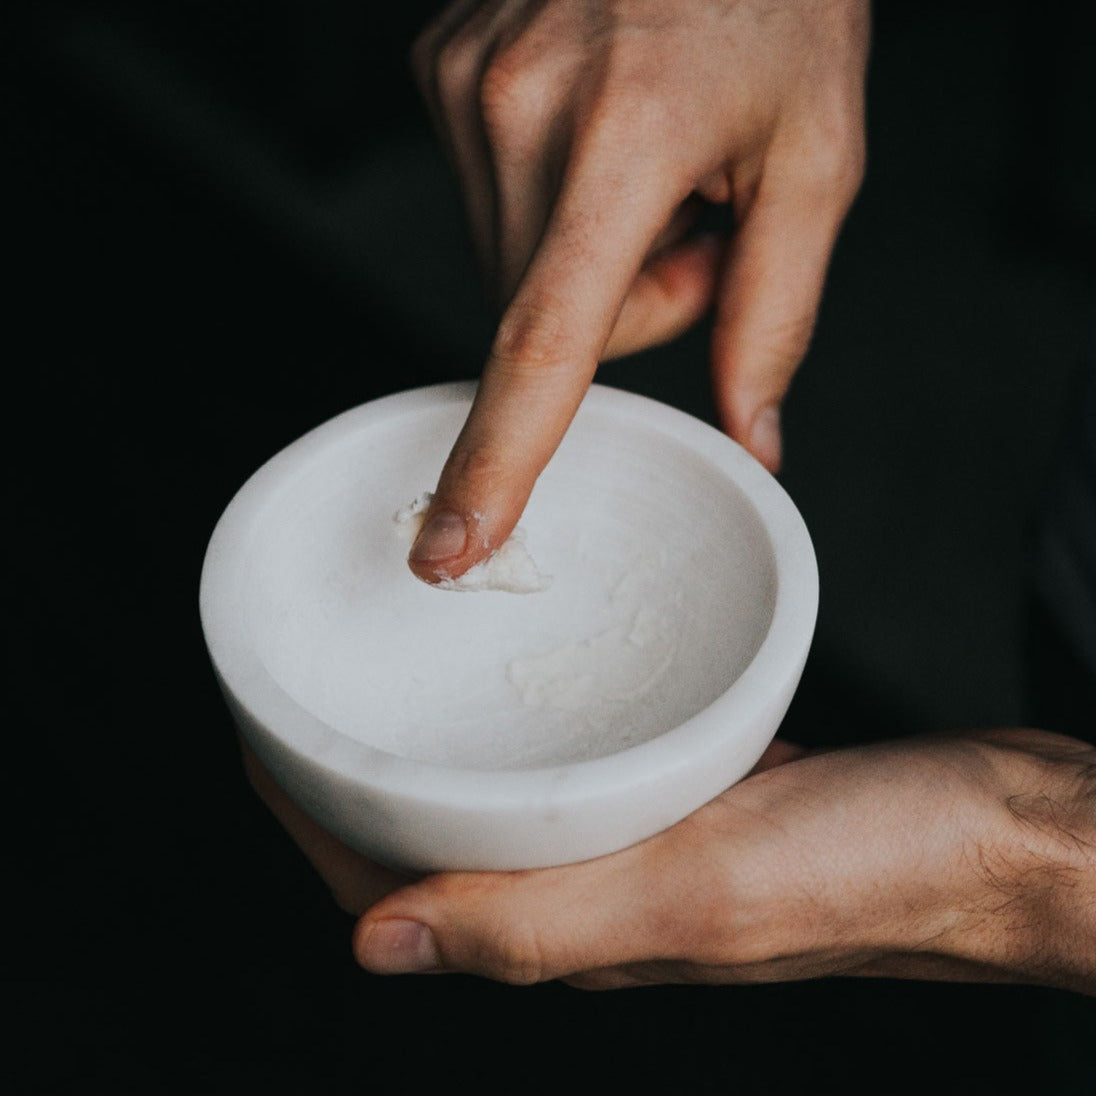 Marble Shaving Bowl by SUPPLY - Storming Gravity